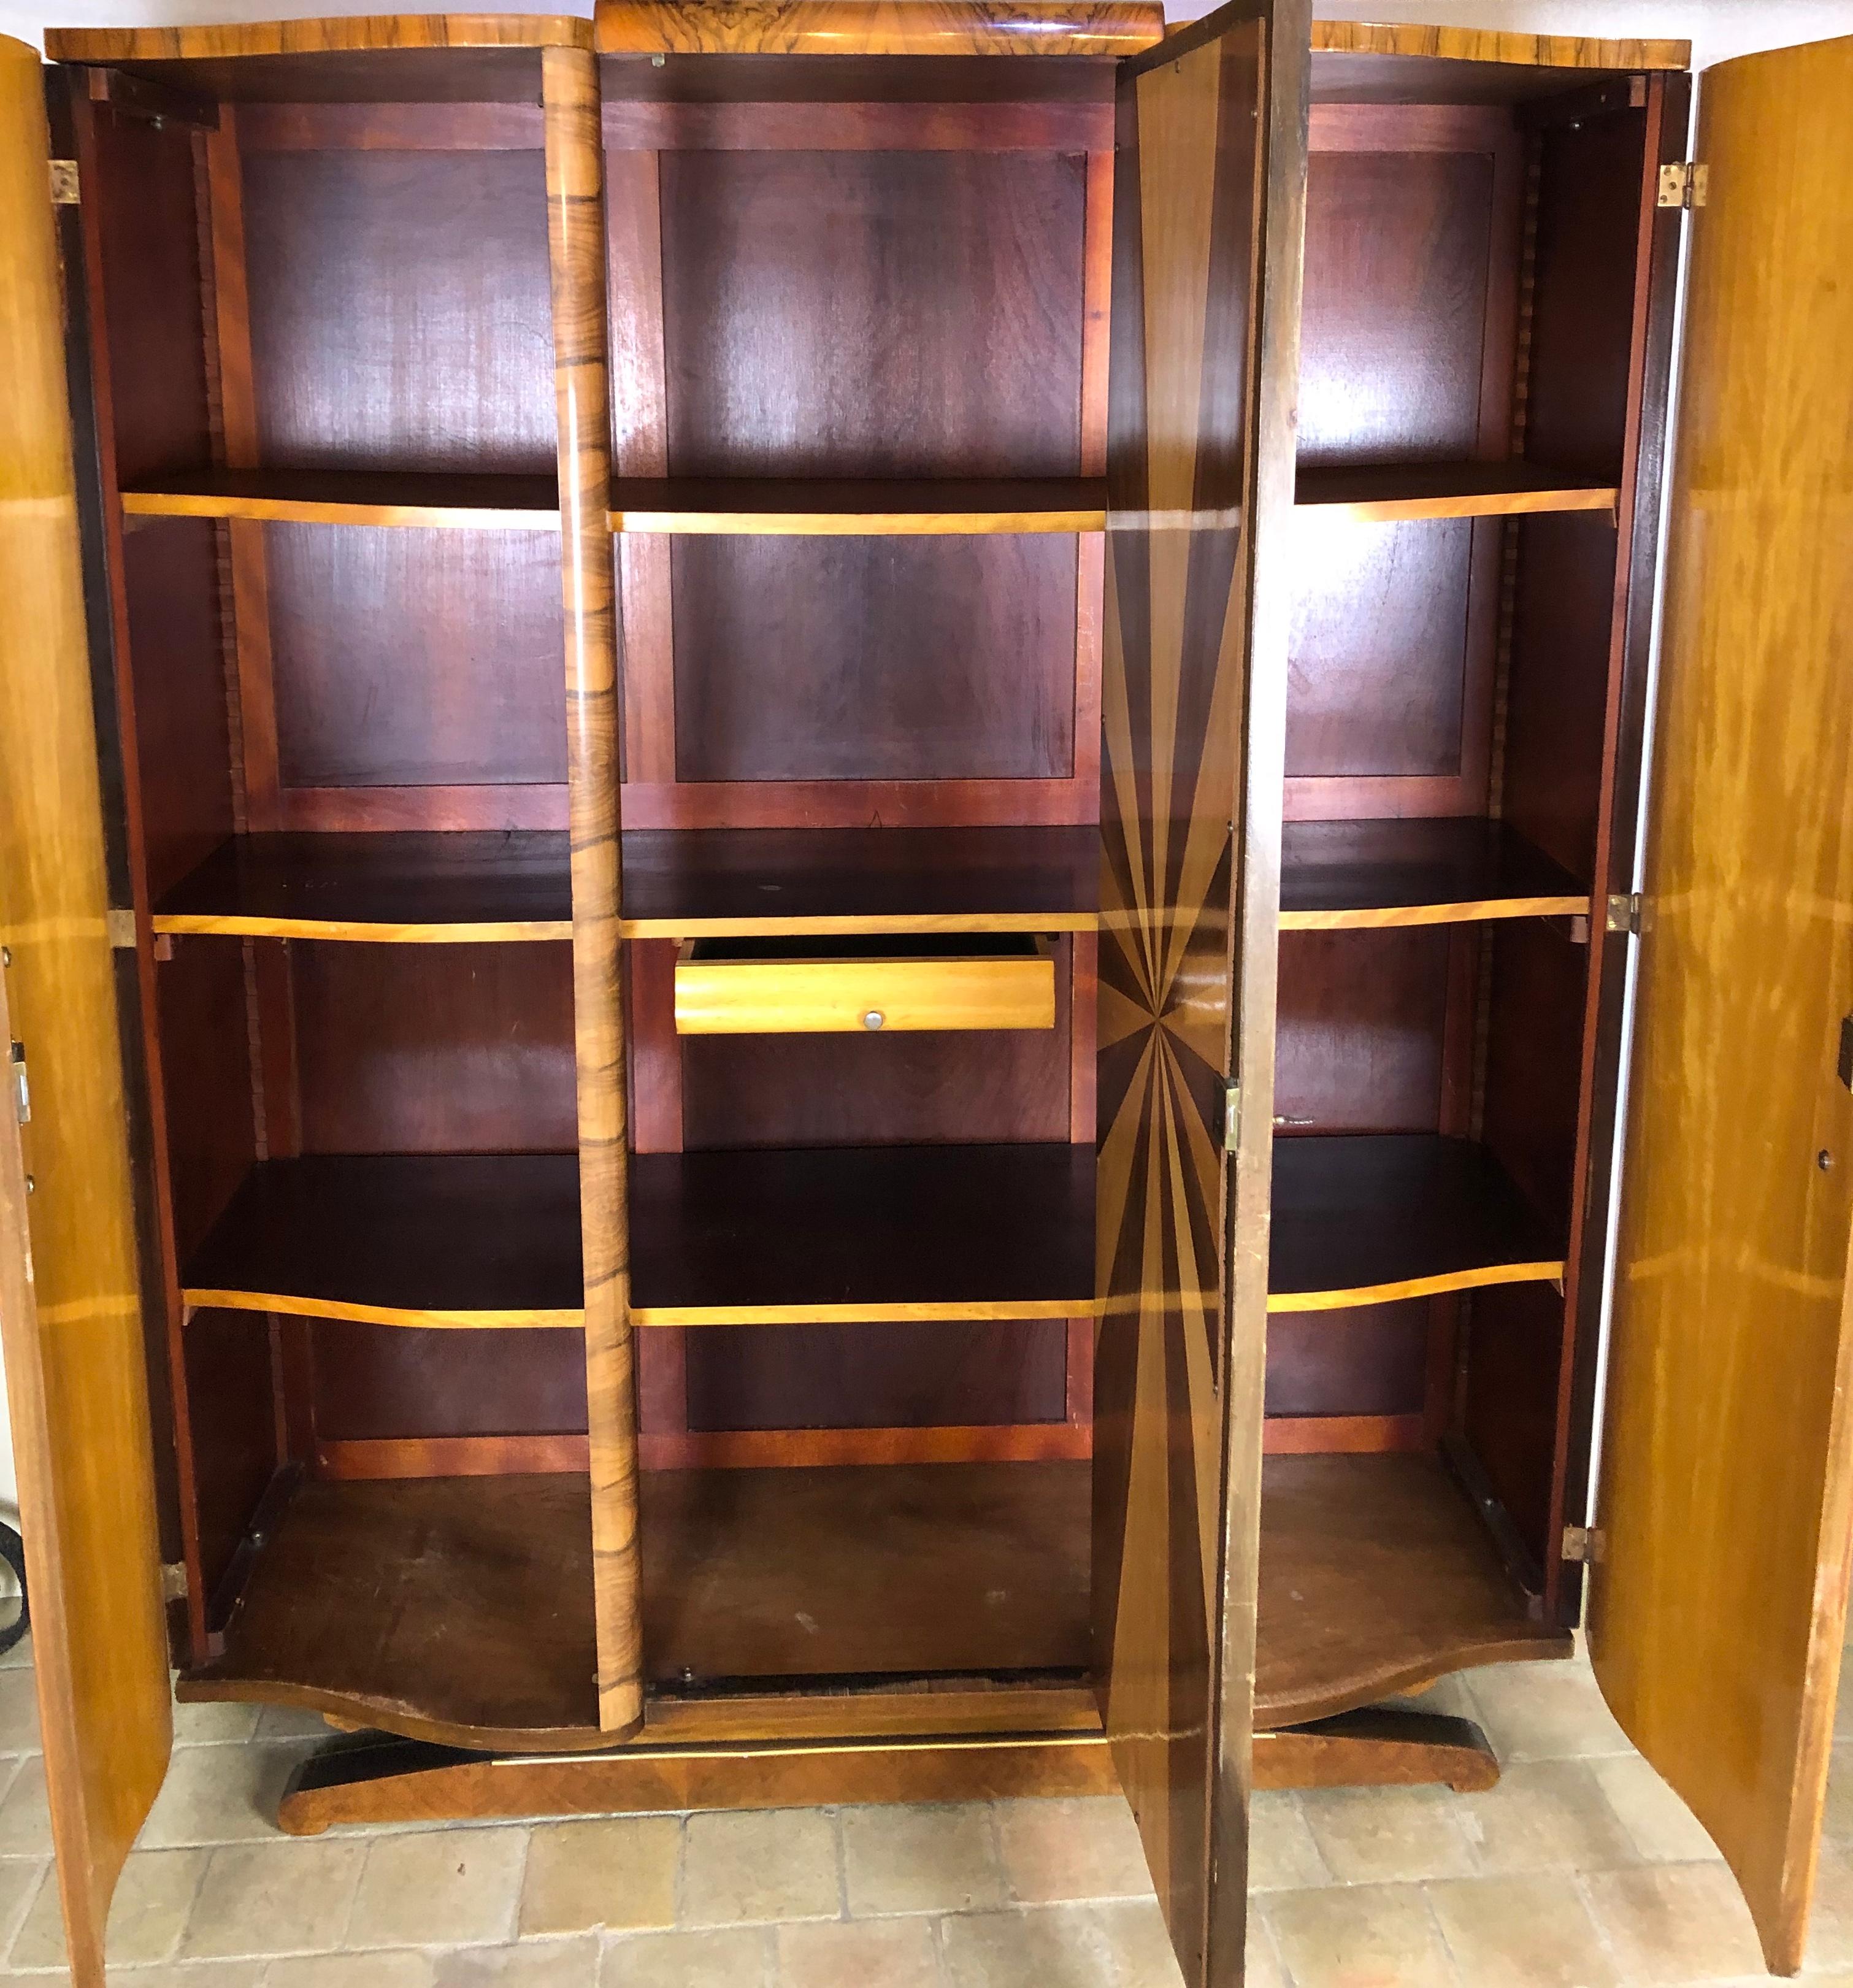 Beautiful quality French art deco armoire constructed of walnut with adjustable shelves. Original nickel plated brass hardware.

This piece is very practical in a bedroom or as a display cabinet when the mirror is removed and replaced with clear